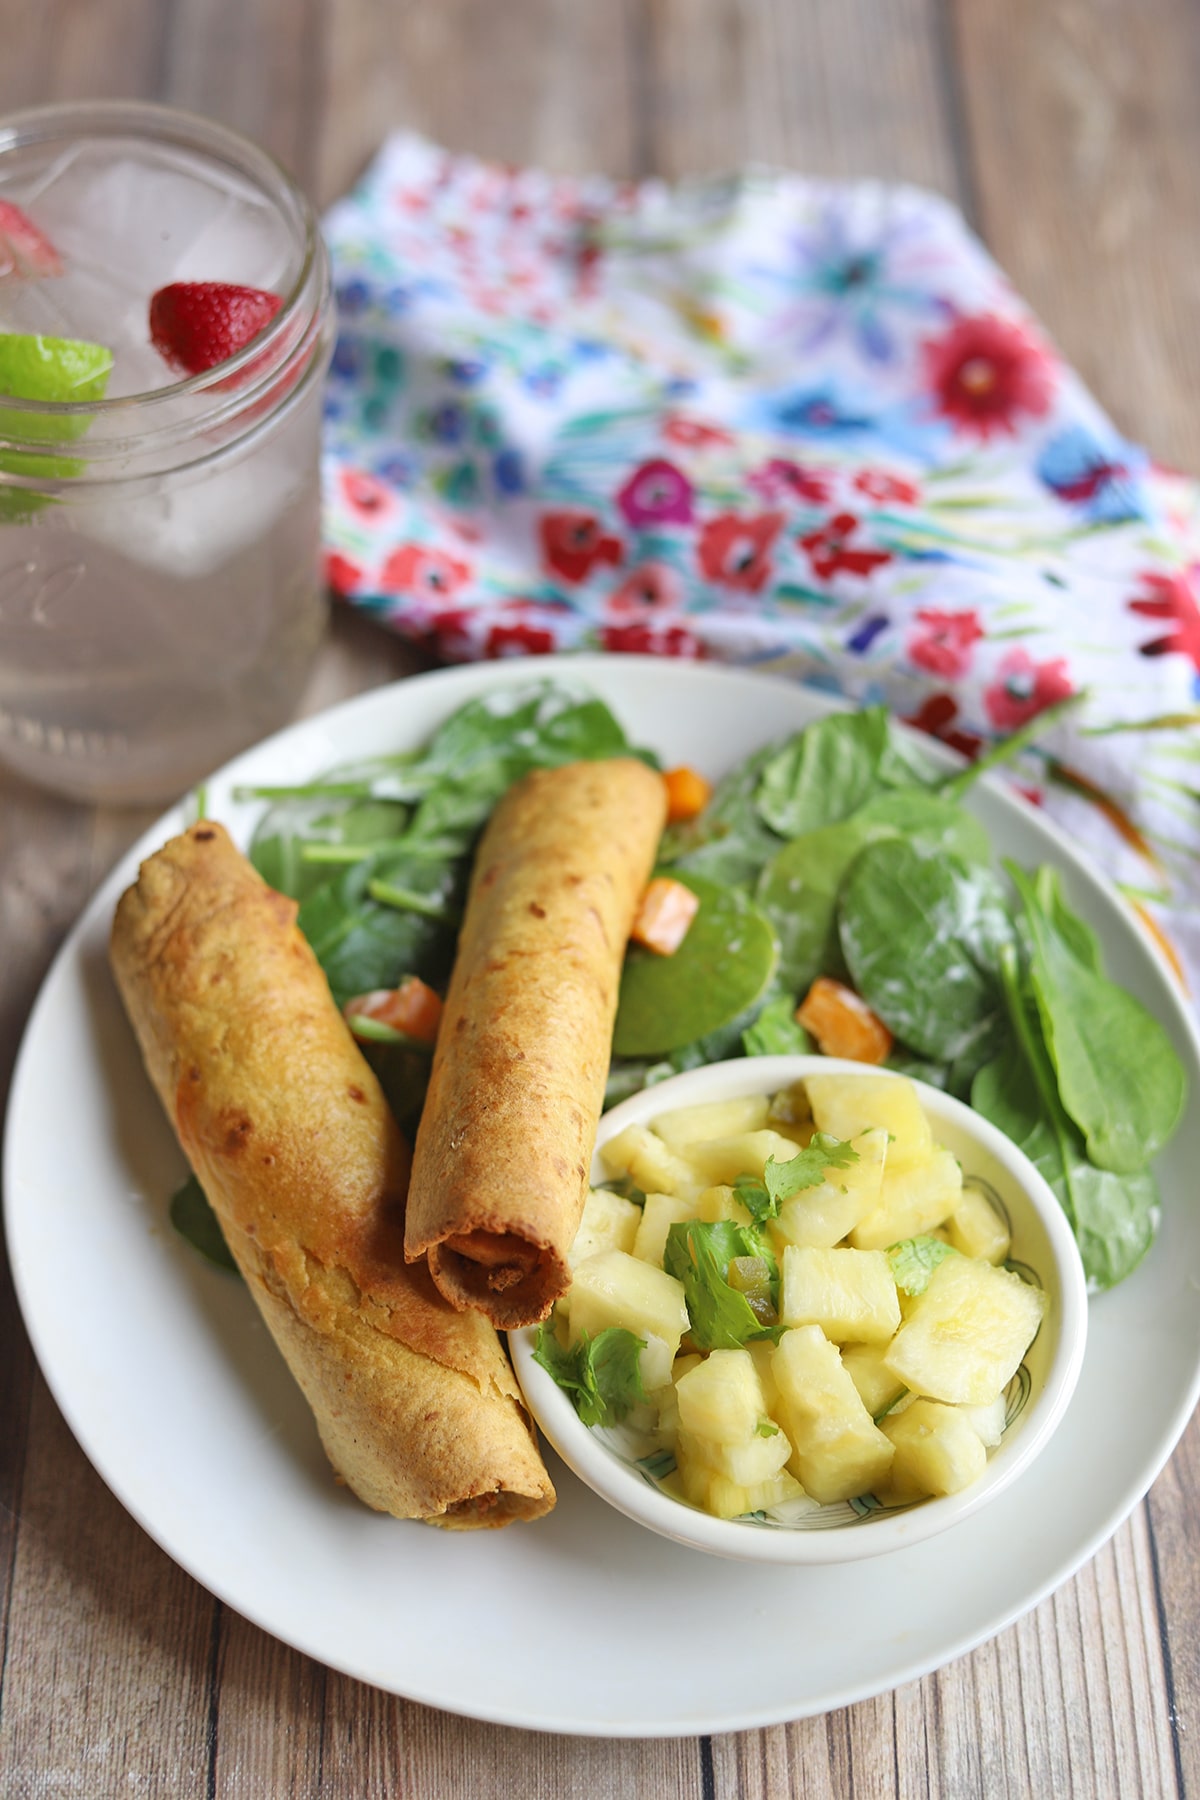 Two taquitos on plate with pineapple salsa and salad.